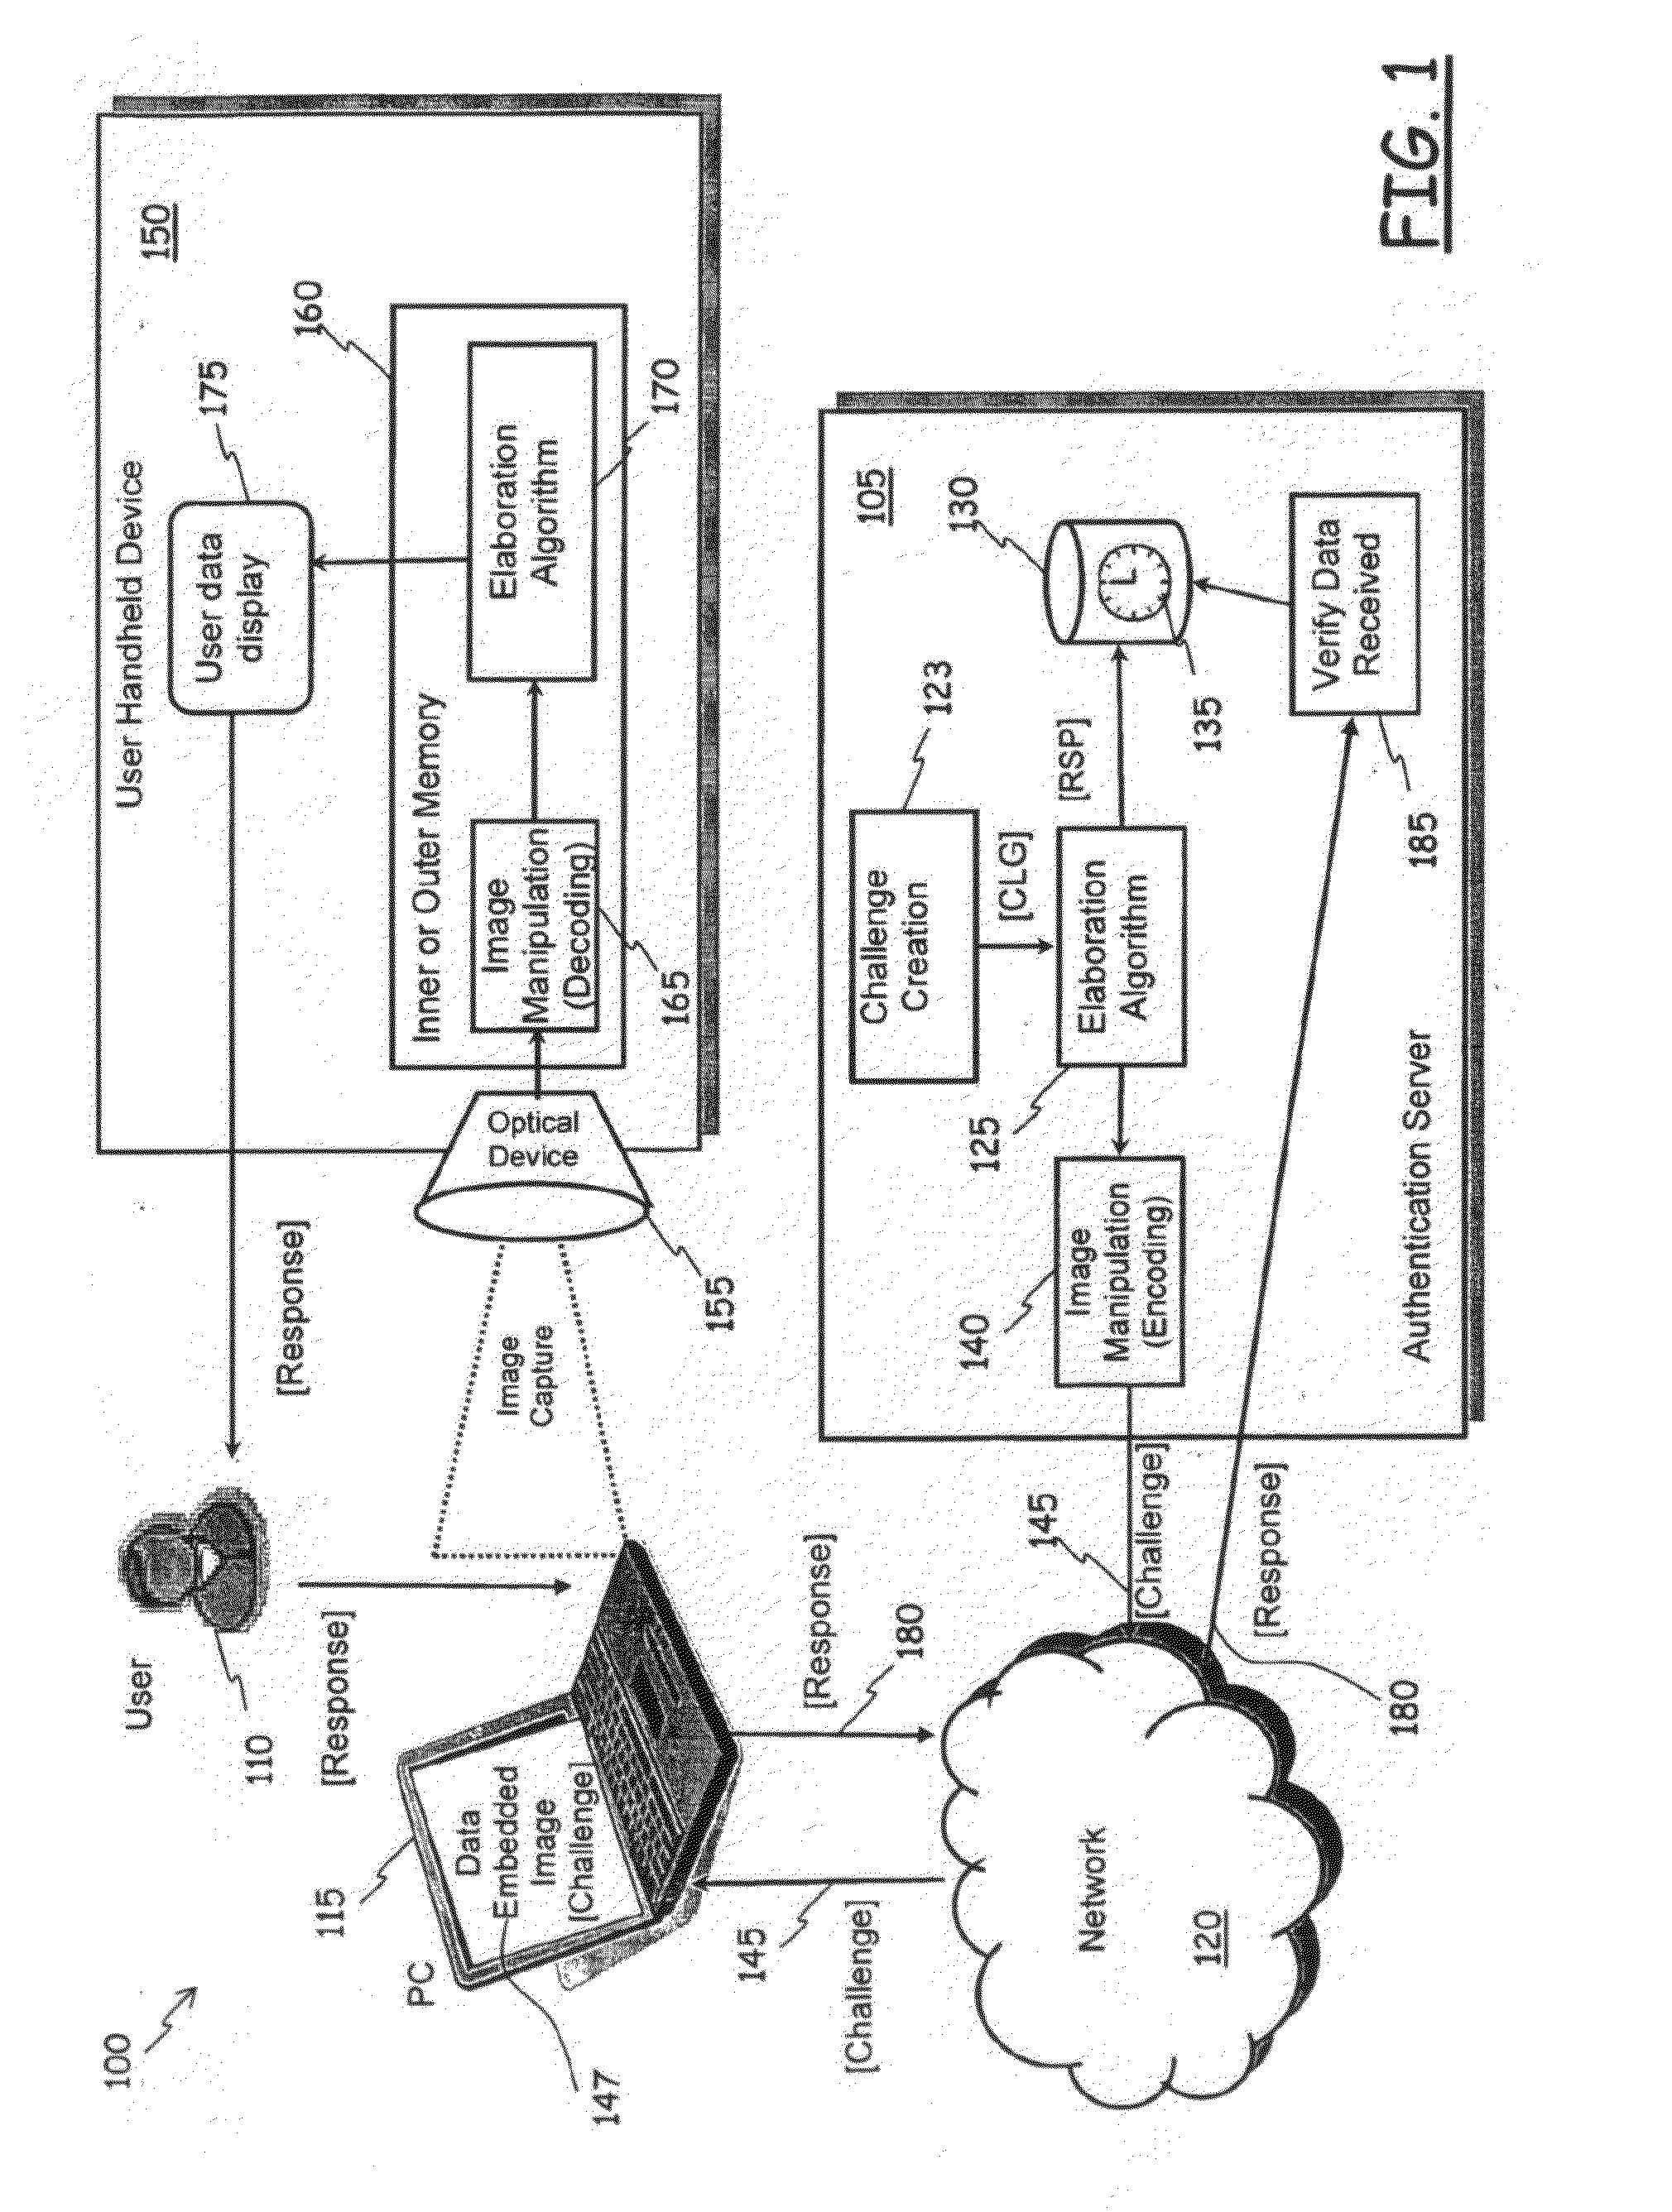 Method of Authentication of Users in Data Processing Systems